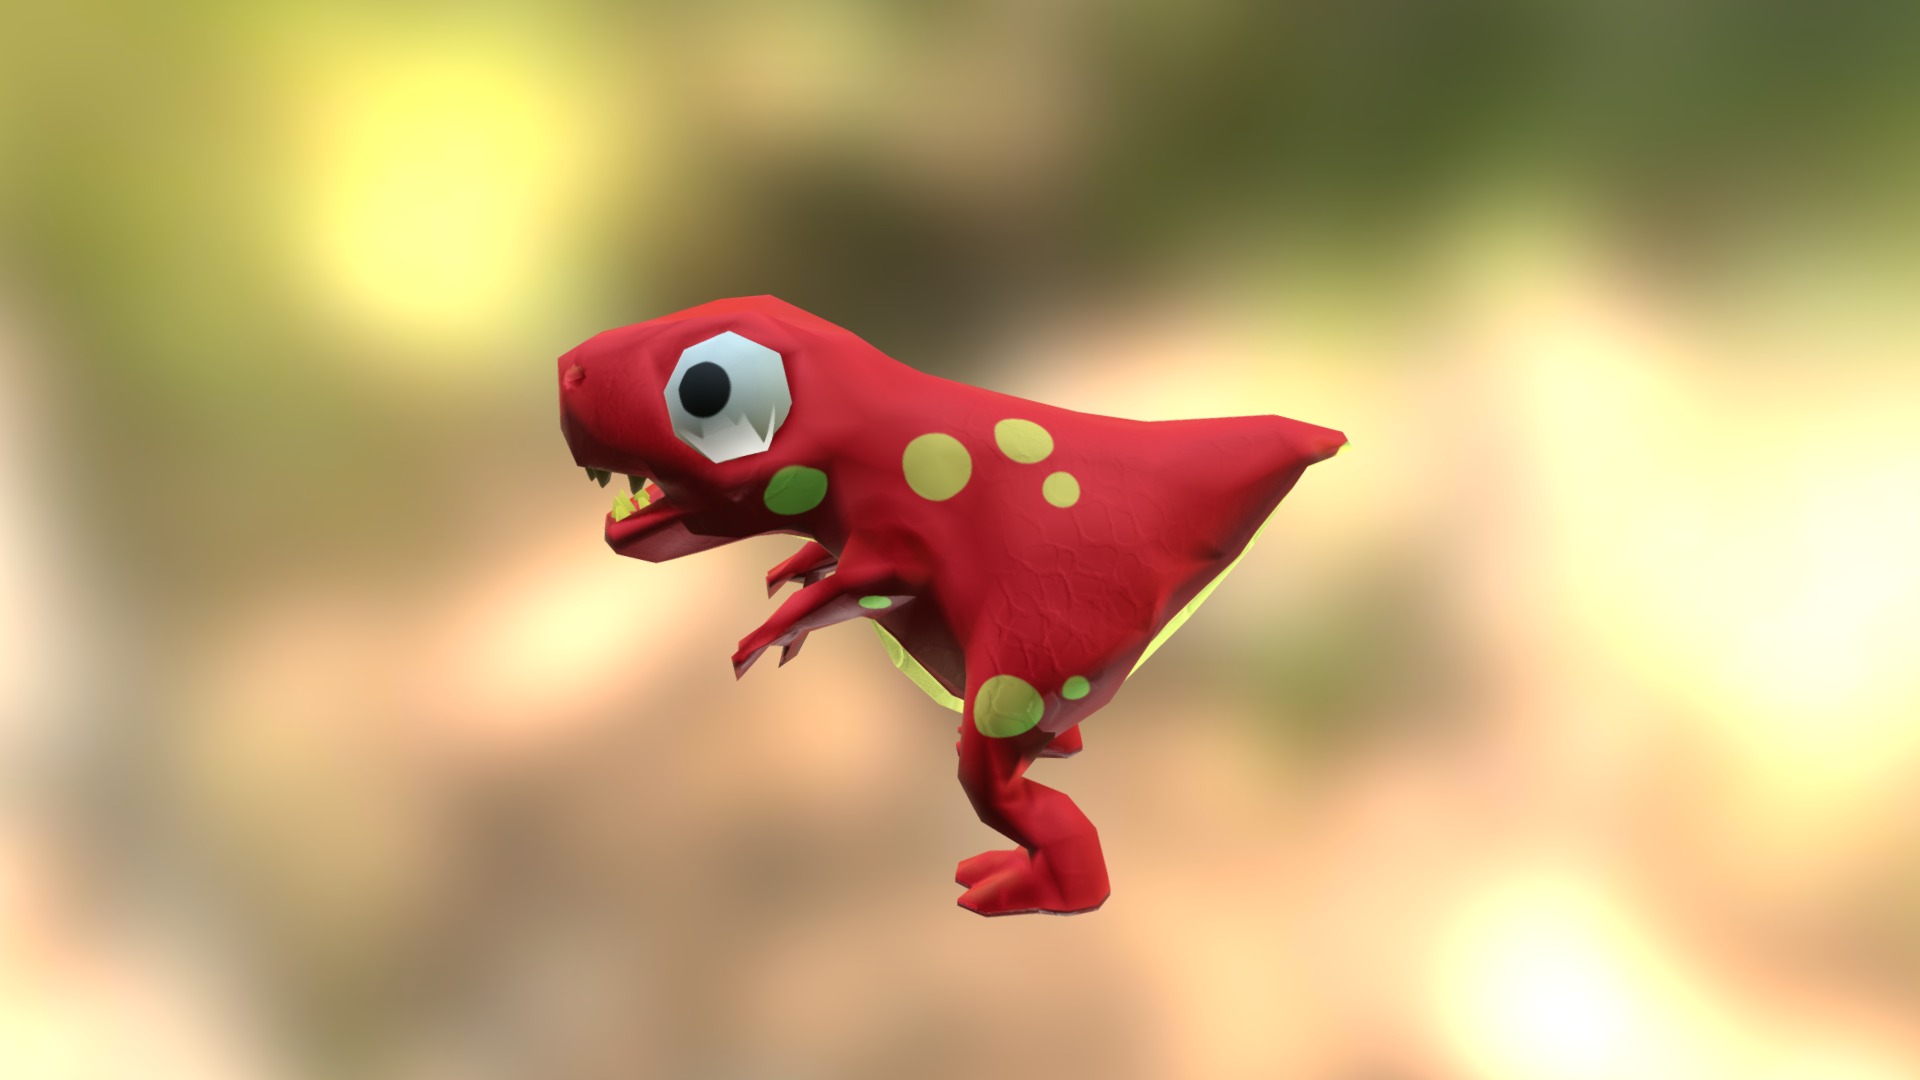 3D model Dino - This is a 3D model of the Dino. The 3D model is about a red frog with a white face.